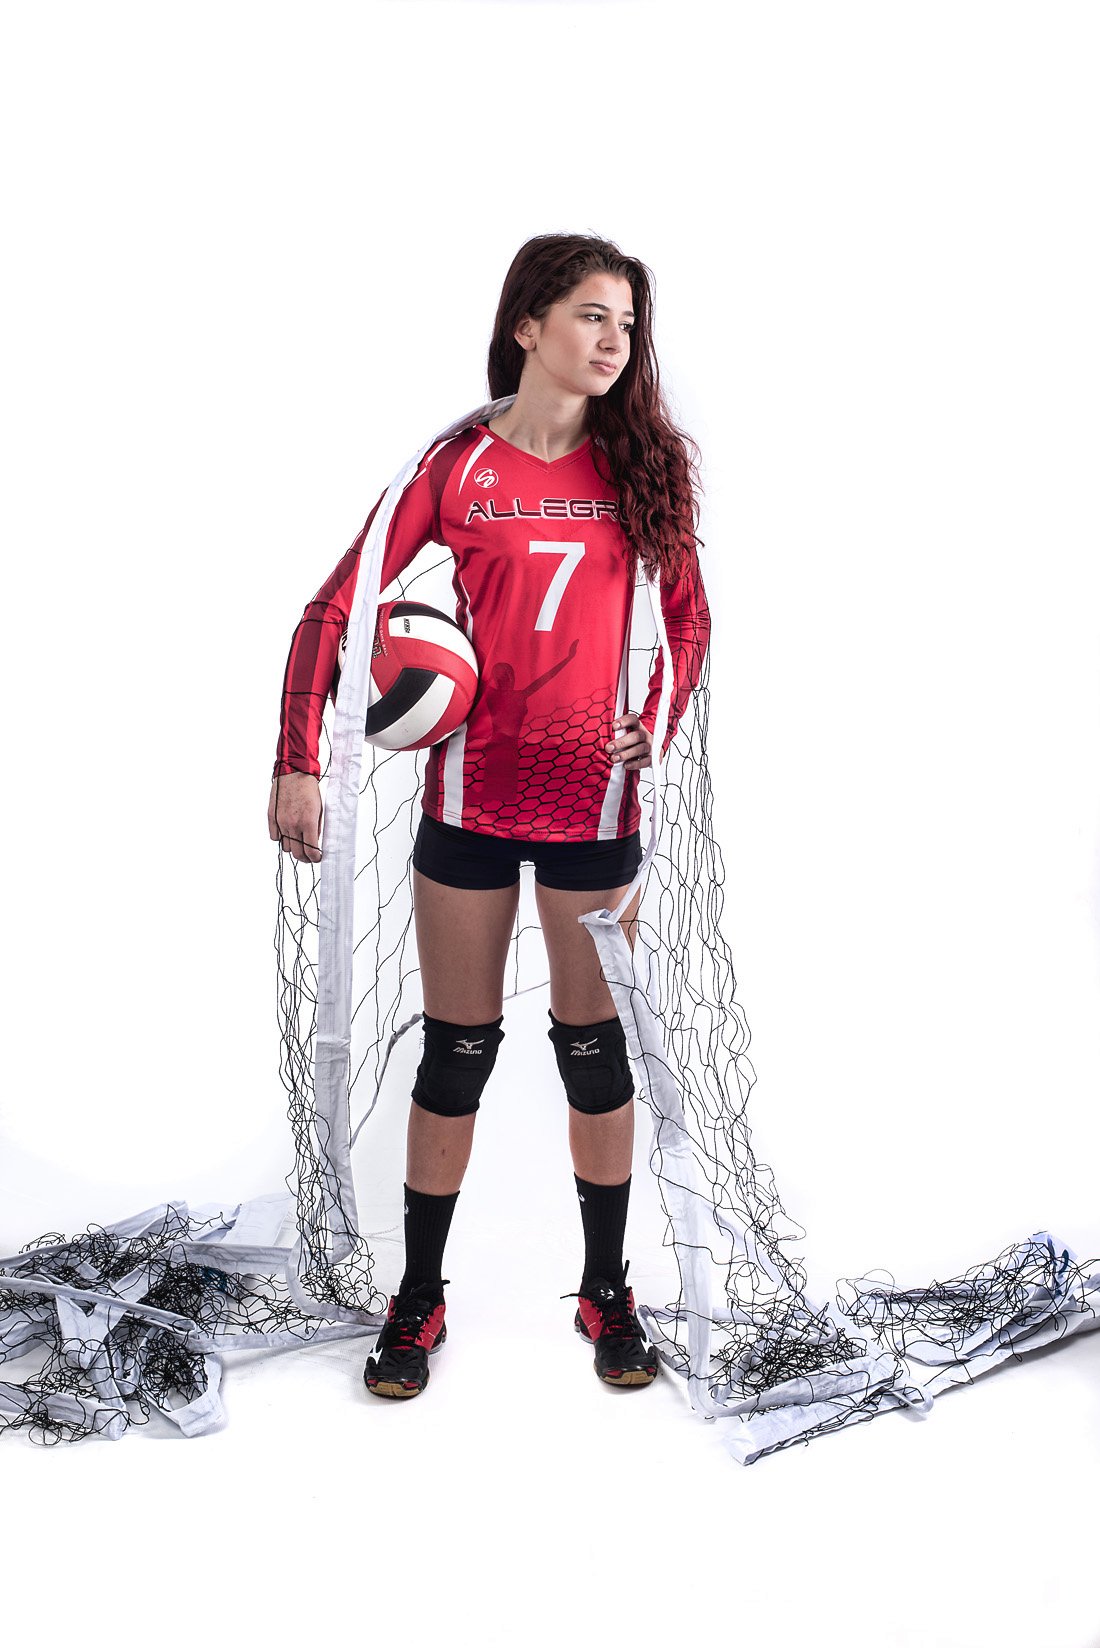 Volleyball pictures in Stroudsburg Studio Bender Photography